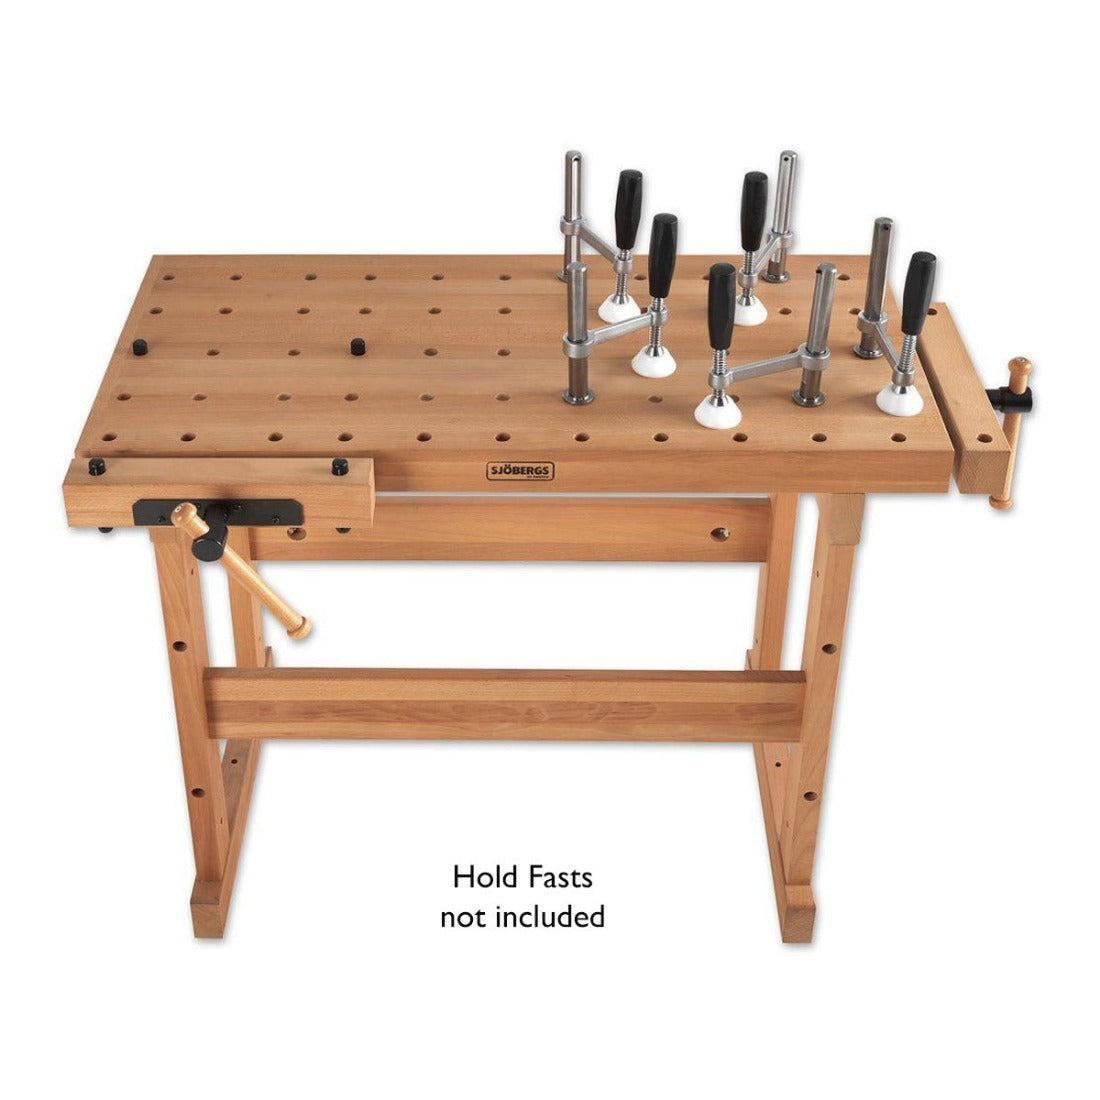 picture showing the Sjoberg multi hole work bench with 4 holdfasts placed around the bench. The holdfasts are not included in the price